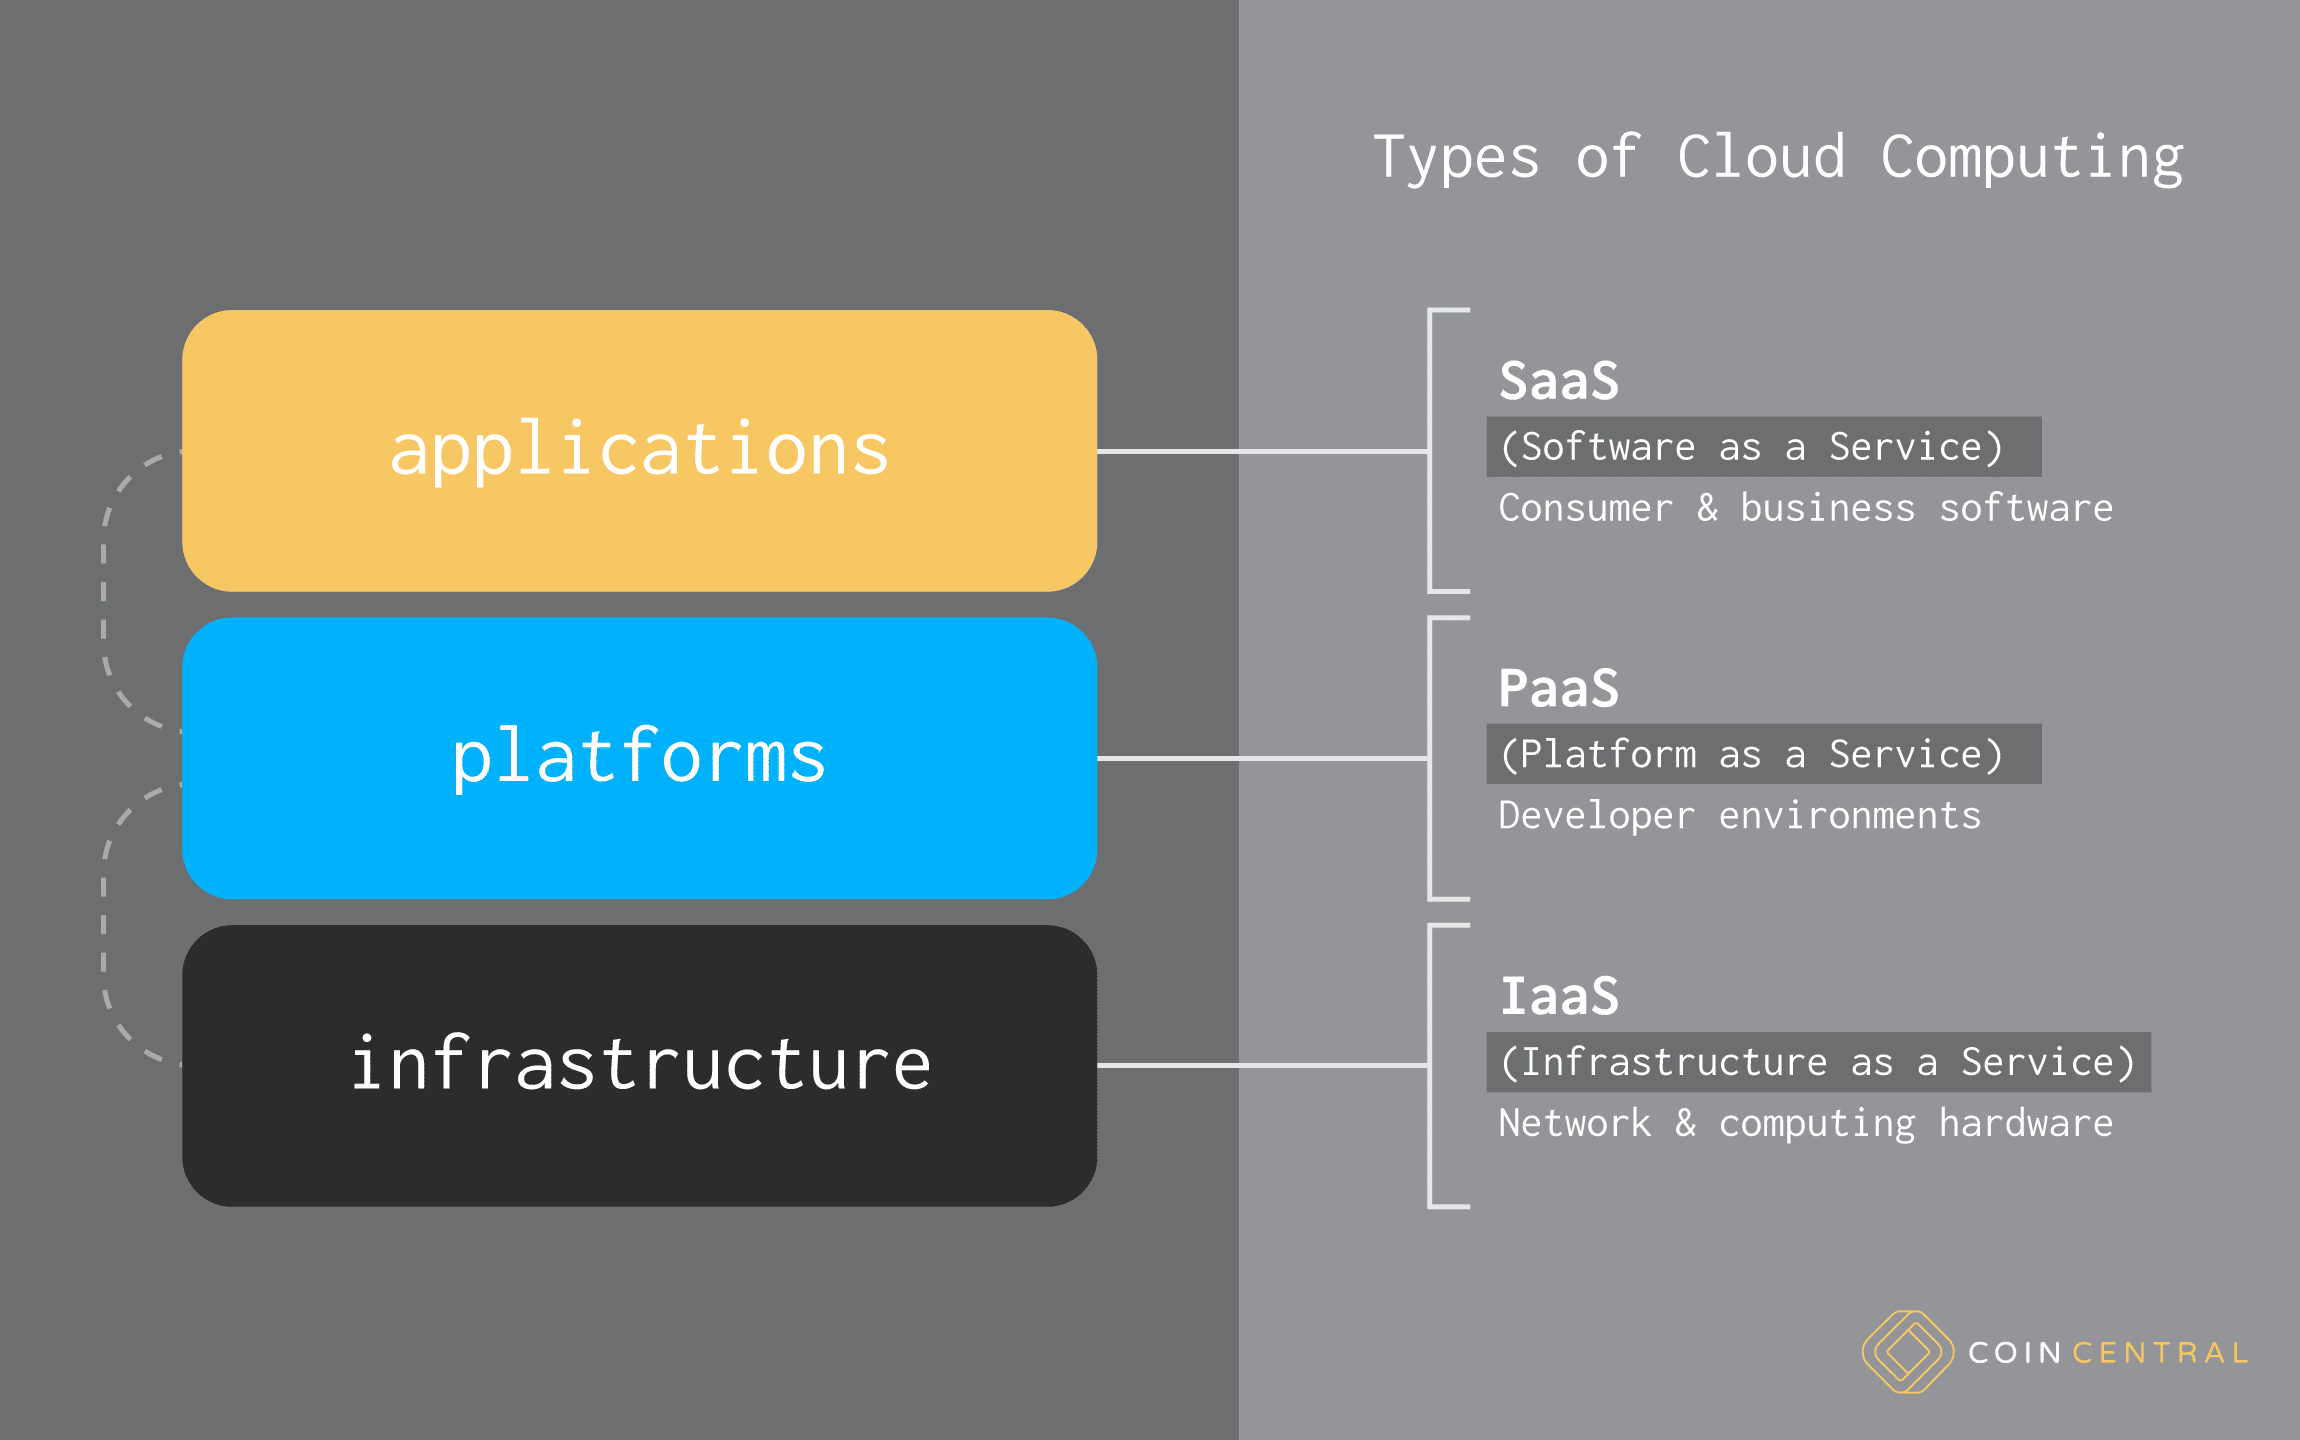 The types of Cloud Computing